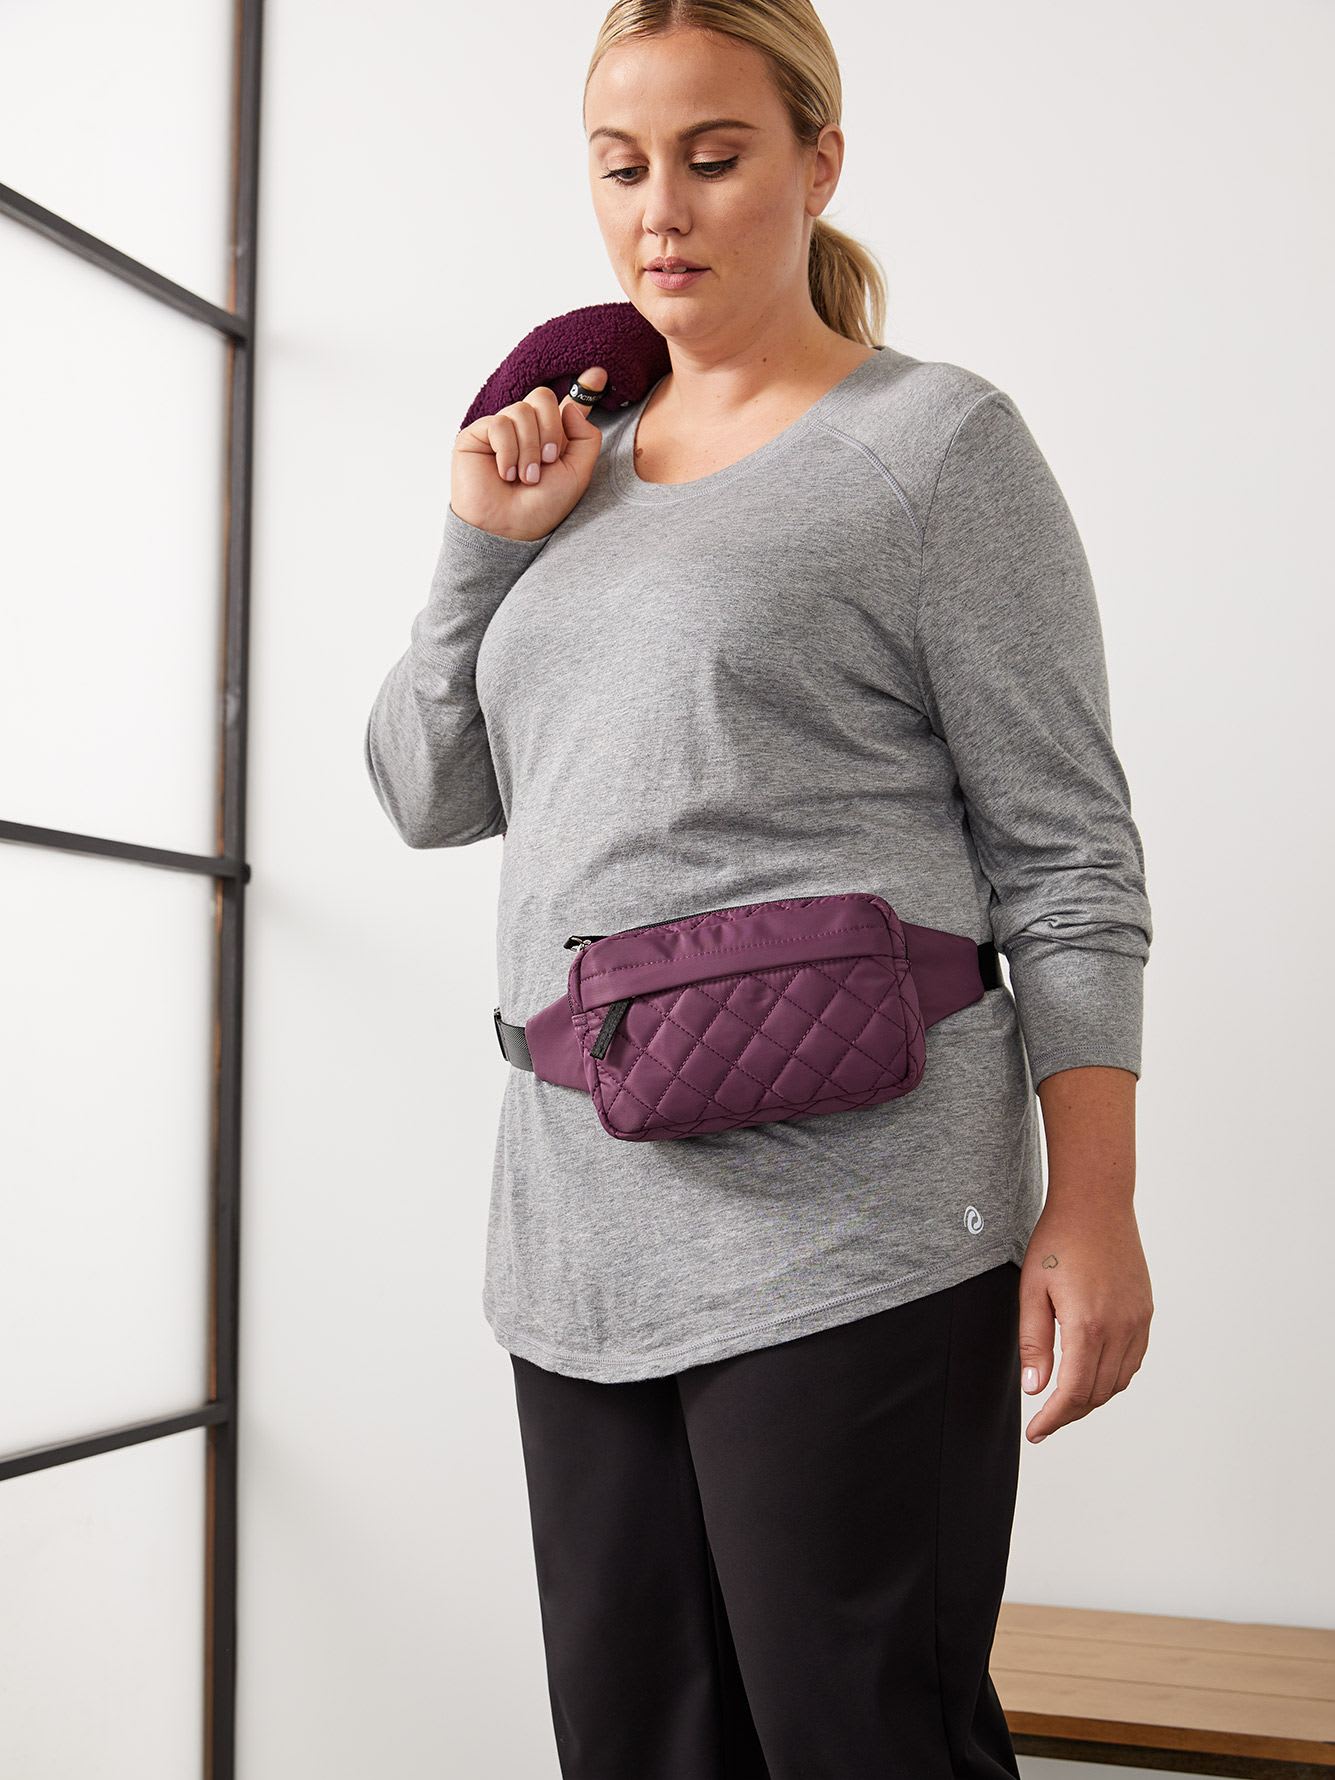 Diamond Quilted Fanny Pack - ActiveZone